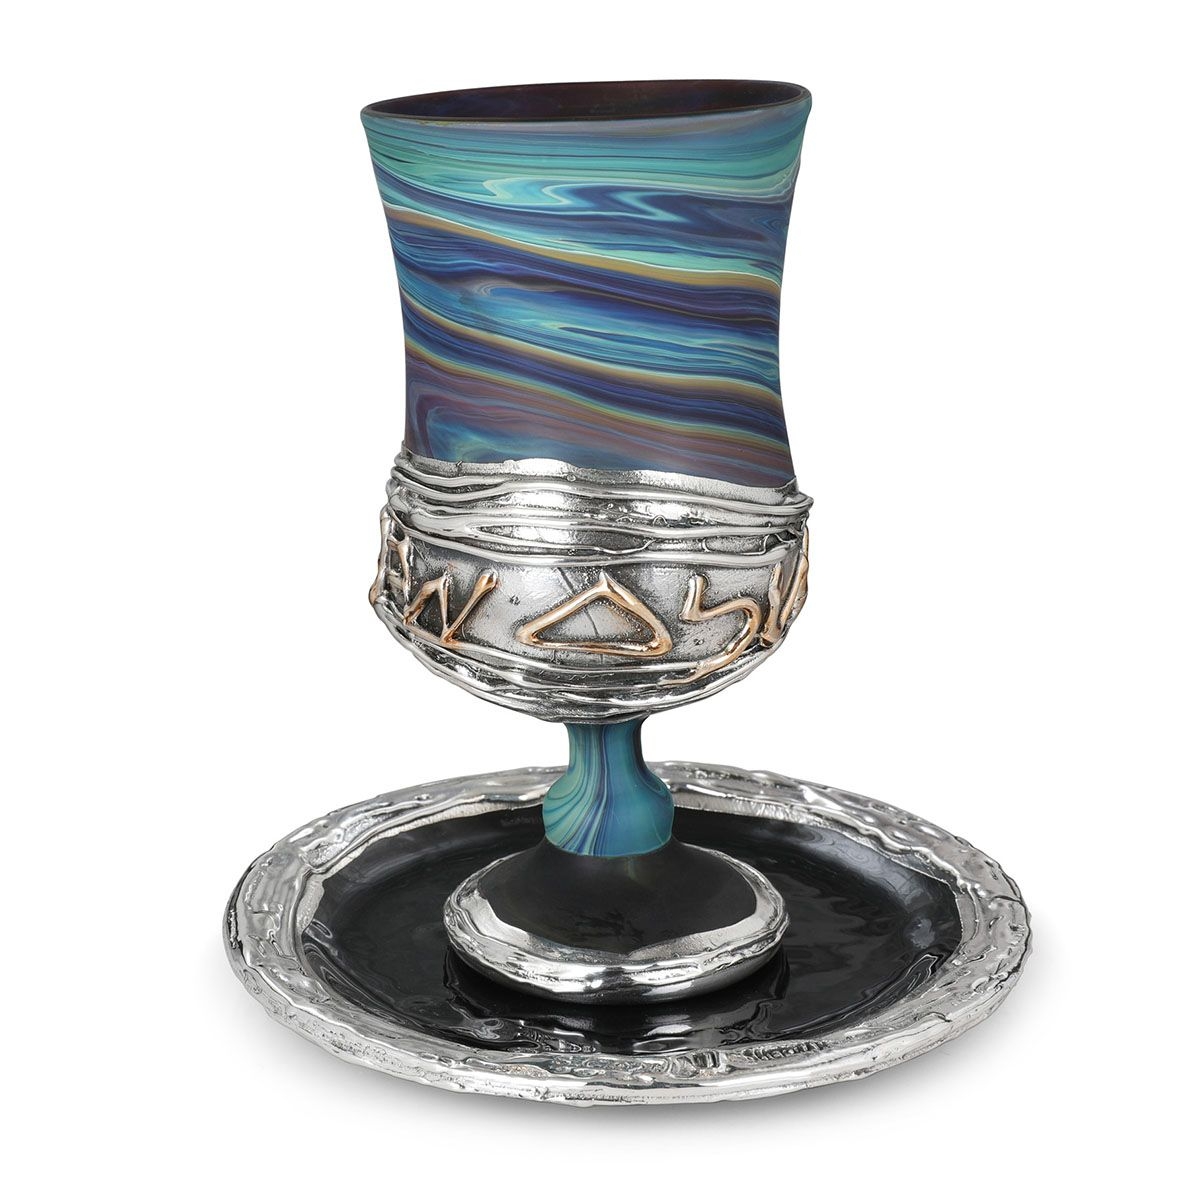 Handmade Ceramic and Sterling Silver Kiddush Cup With Ancient Hebrew "Jerusalem" Inscription - 1